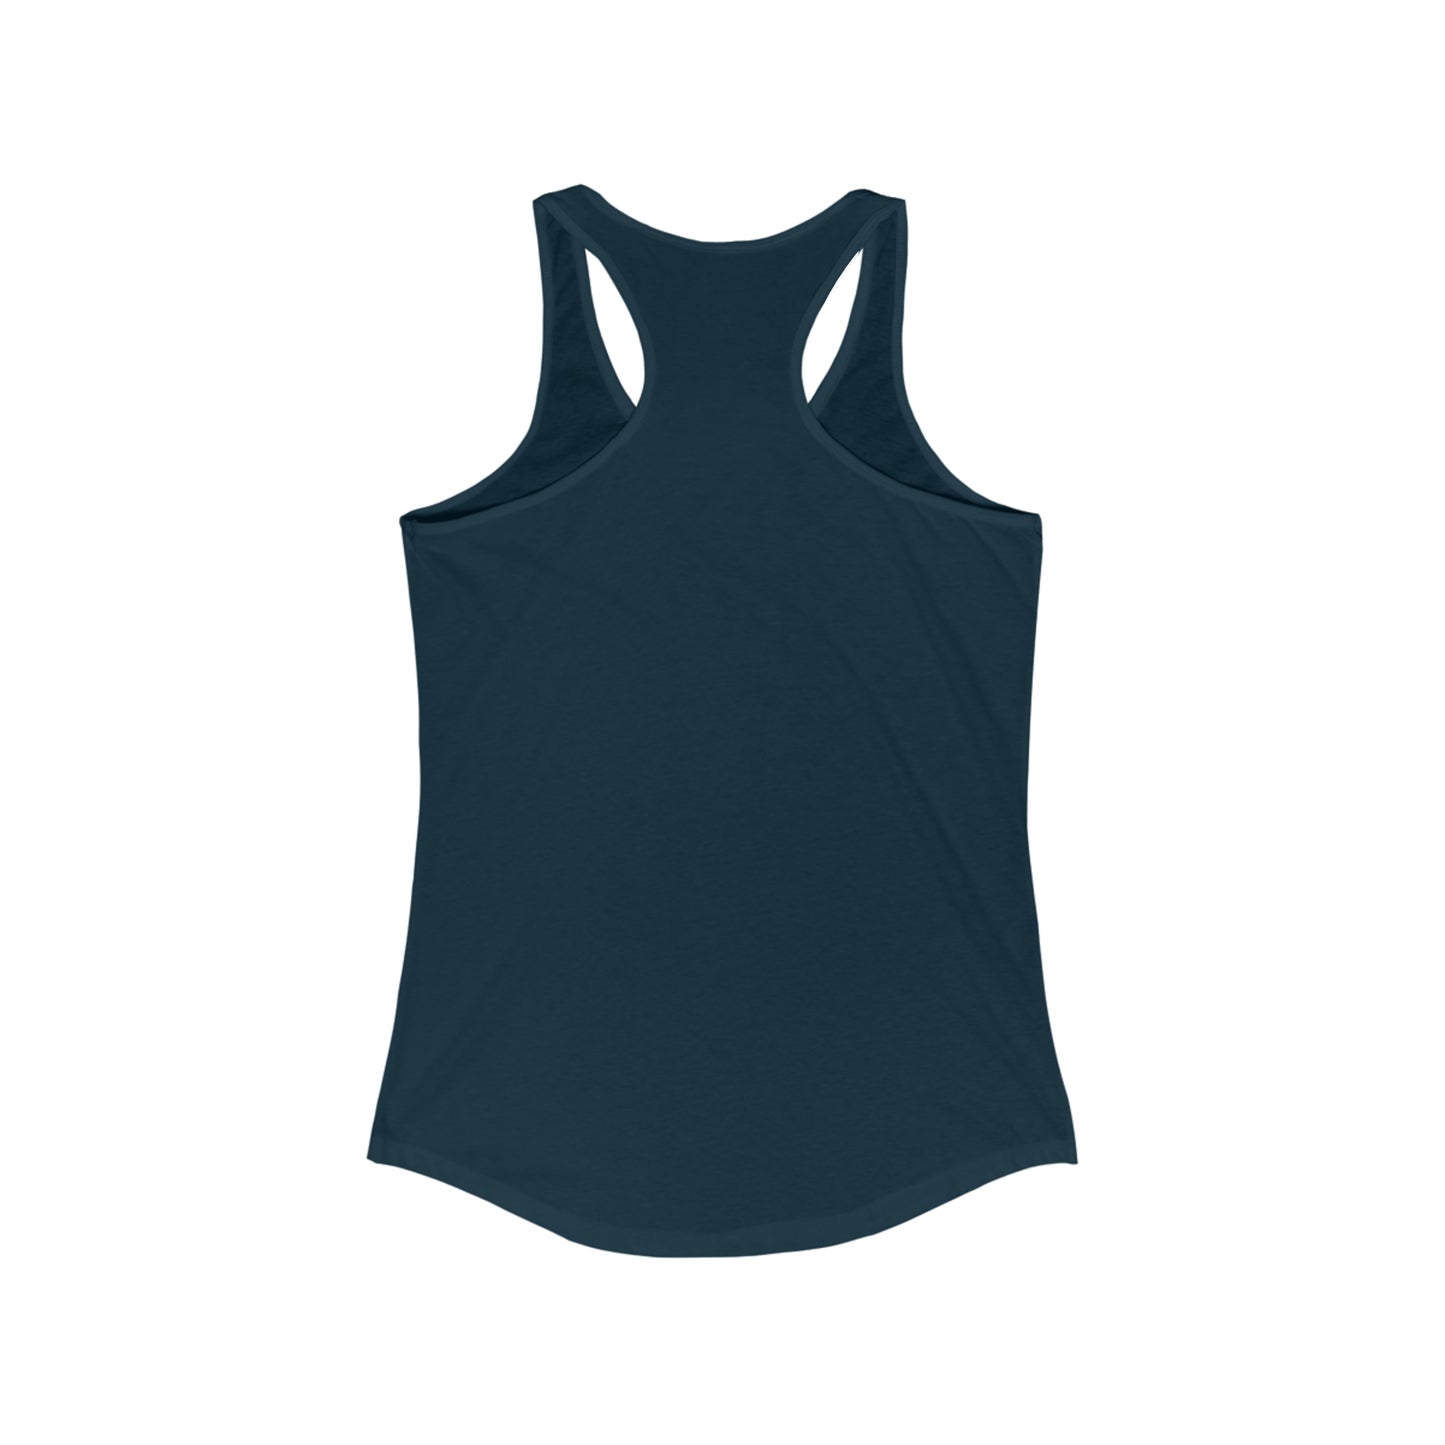 Women's Gold and Bold Warrior - Ideal Racerback Tank